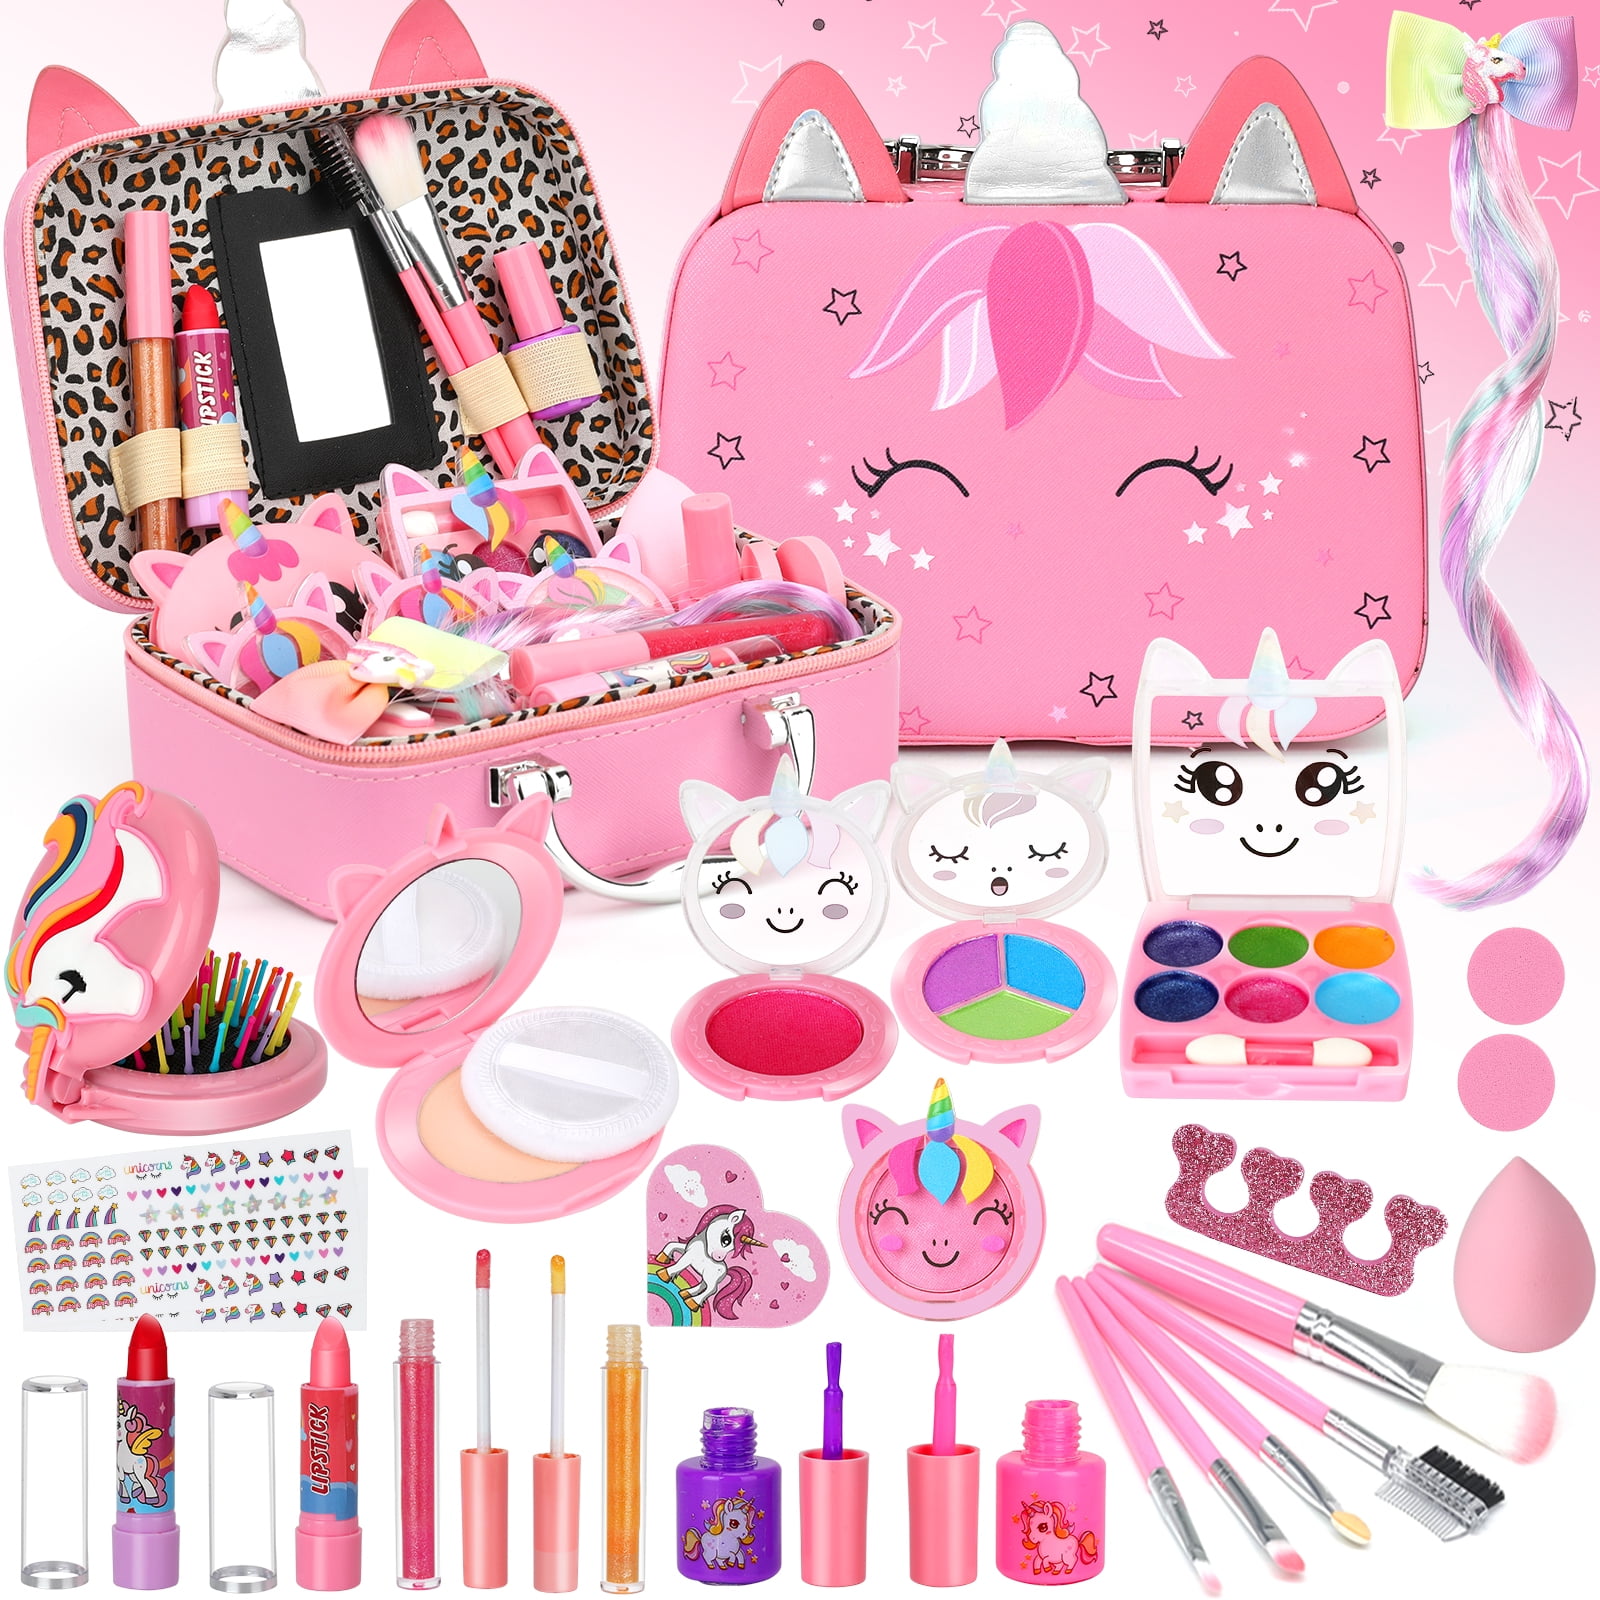 Kids Makeup Kit for Girls, Soft to skin, Easy to wash, 17 Pcs Princess Makeup  Set Toys for 3 4 5 6 7 8 9 10 11 12 & Up Year Old